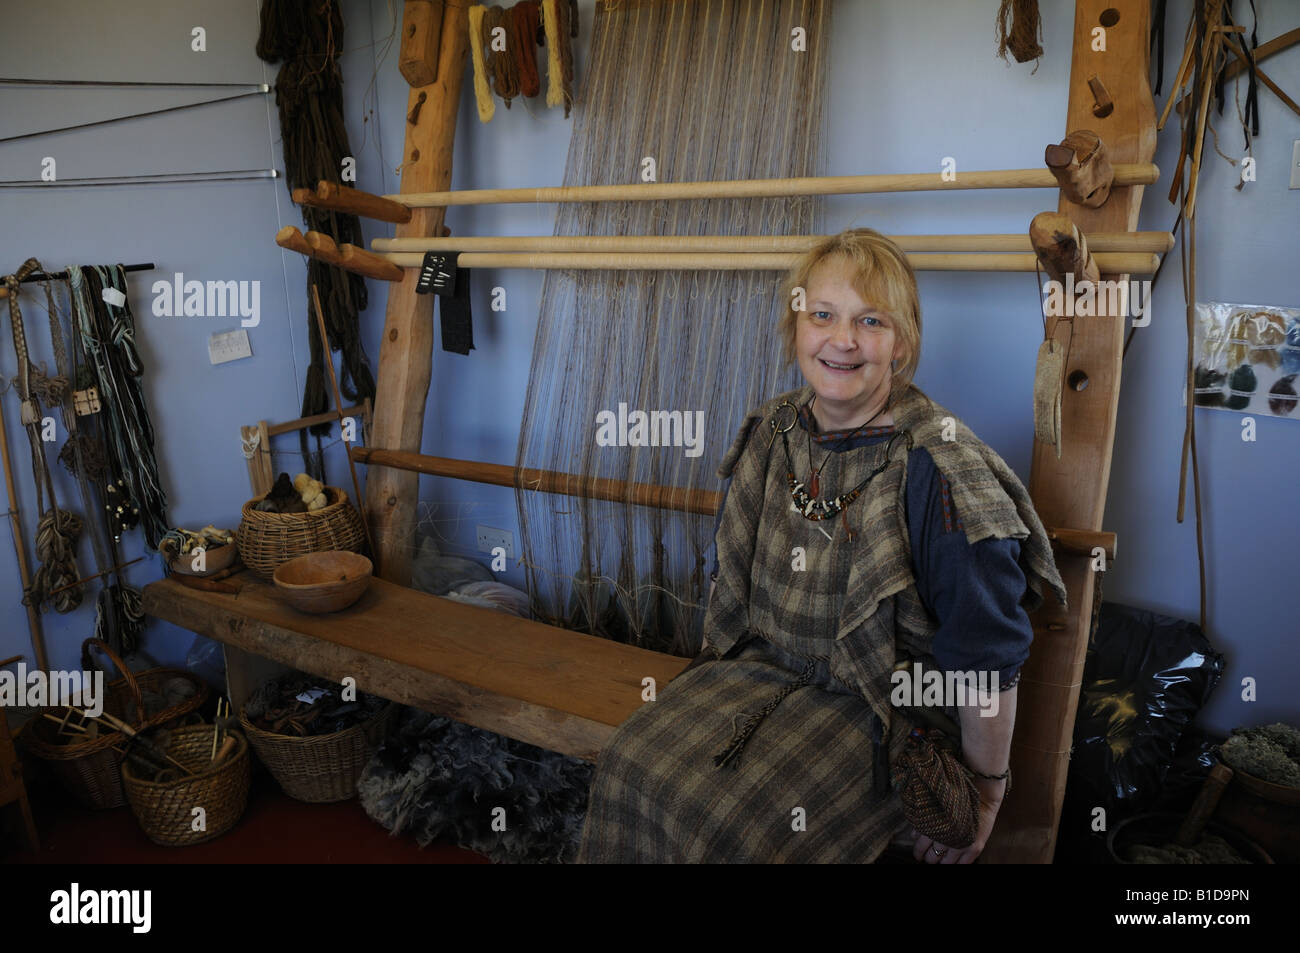 At Scatness in the Shetland Isles, Shetlander Elizabeth Johnston weaves on a loom similar to ones the Vikings would have used. Stock Photo